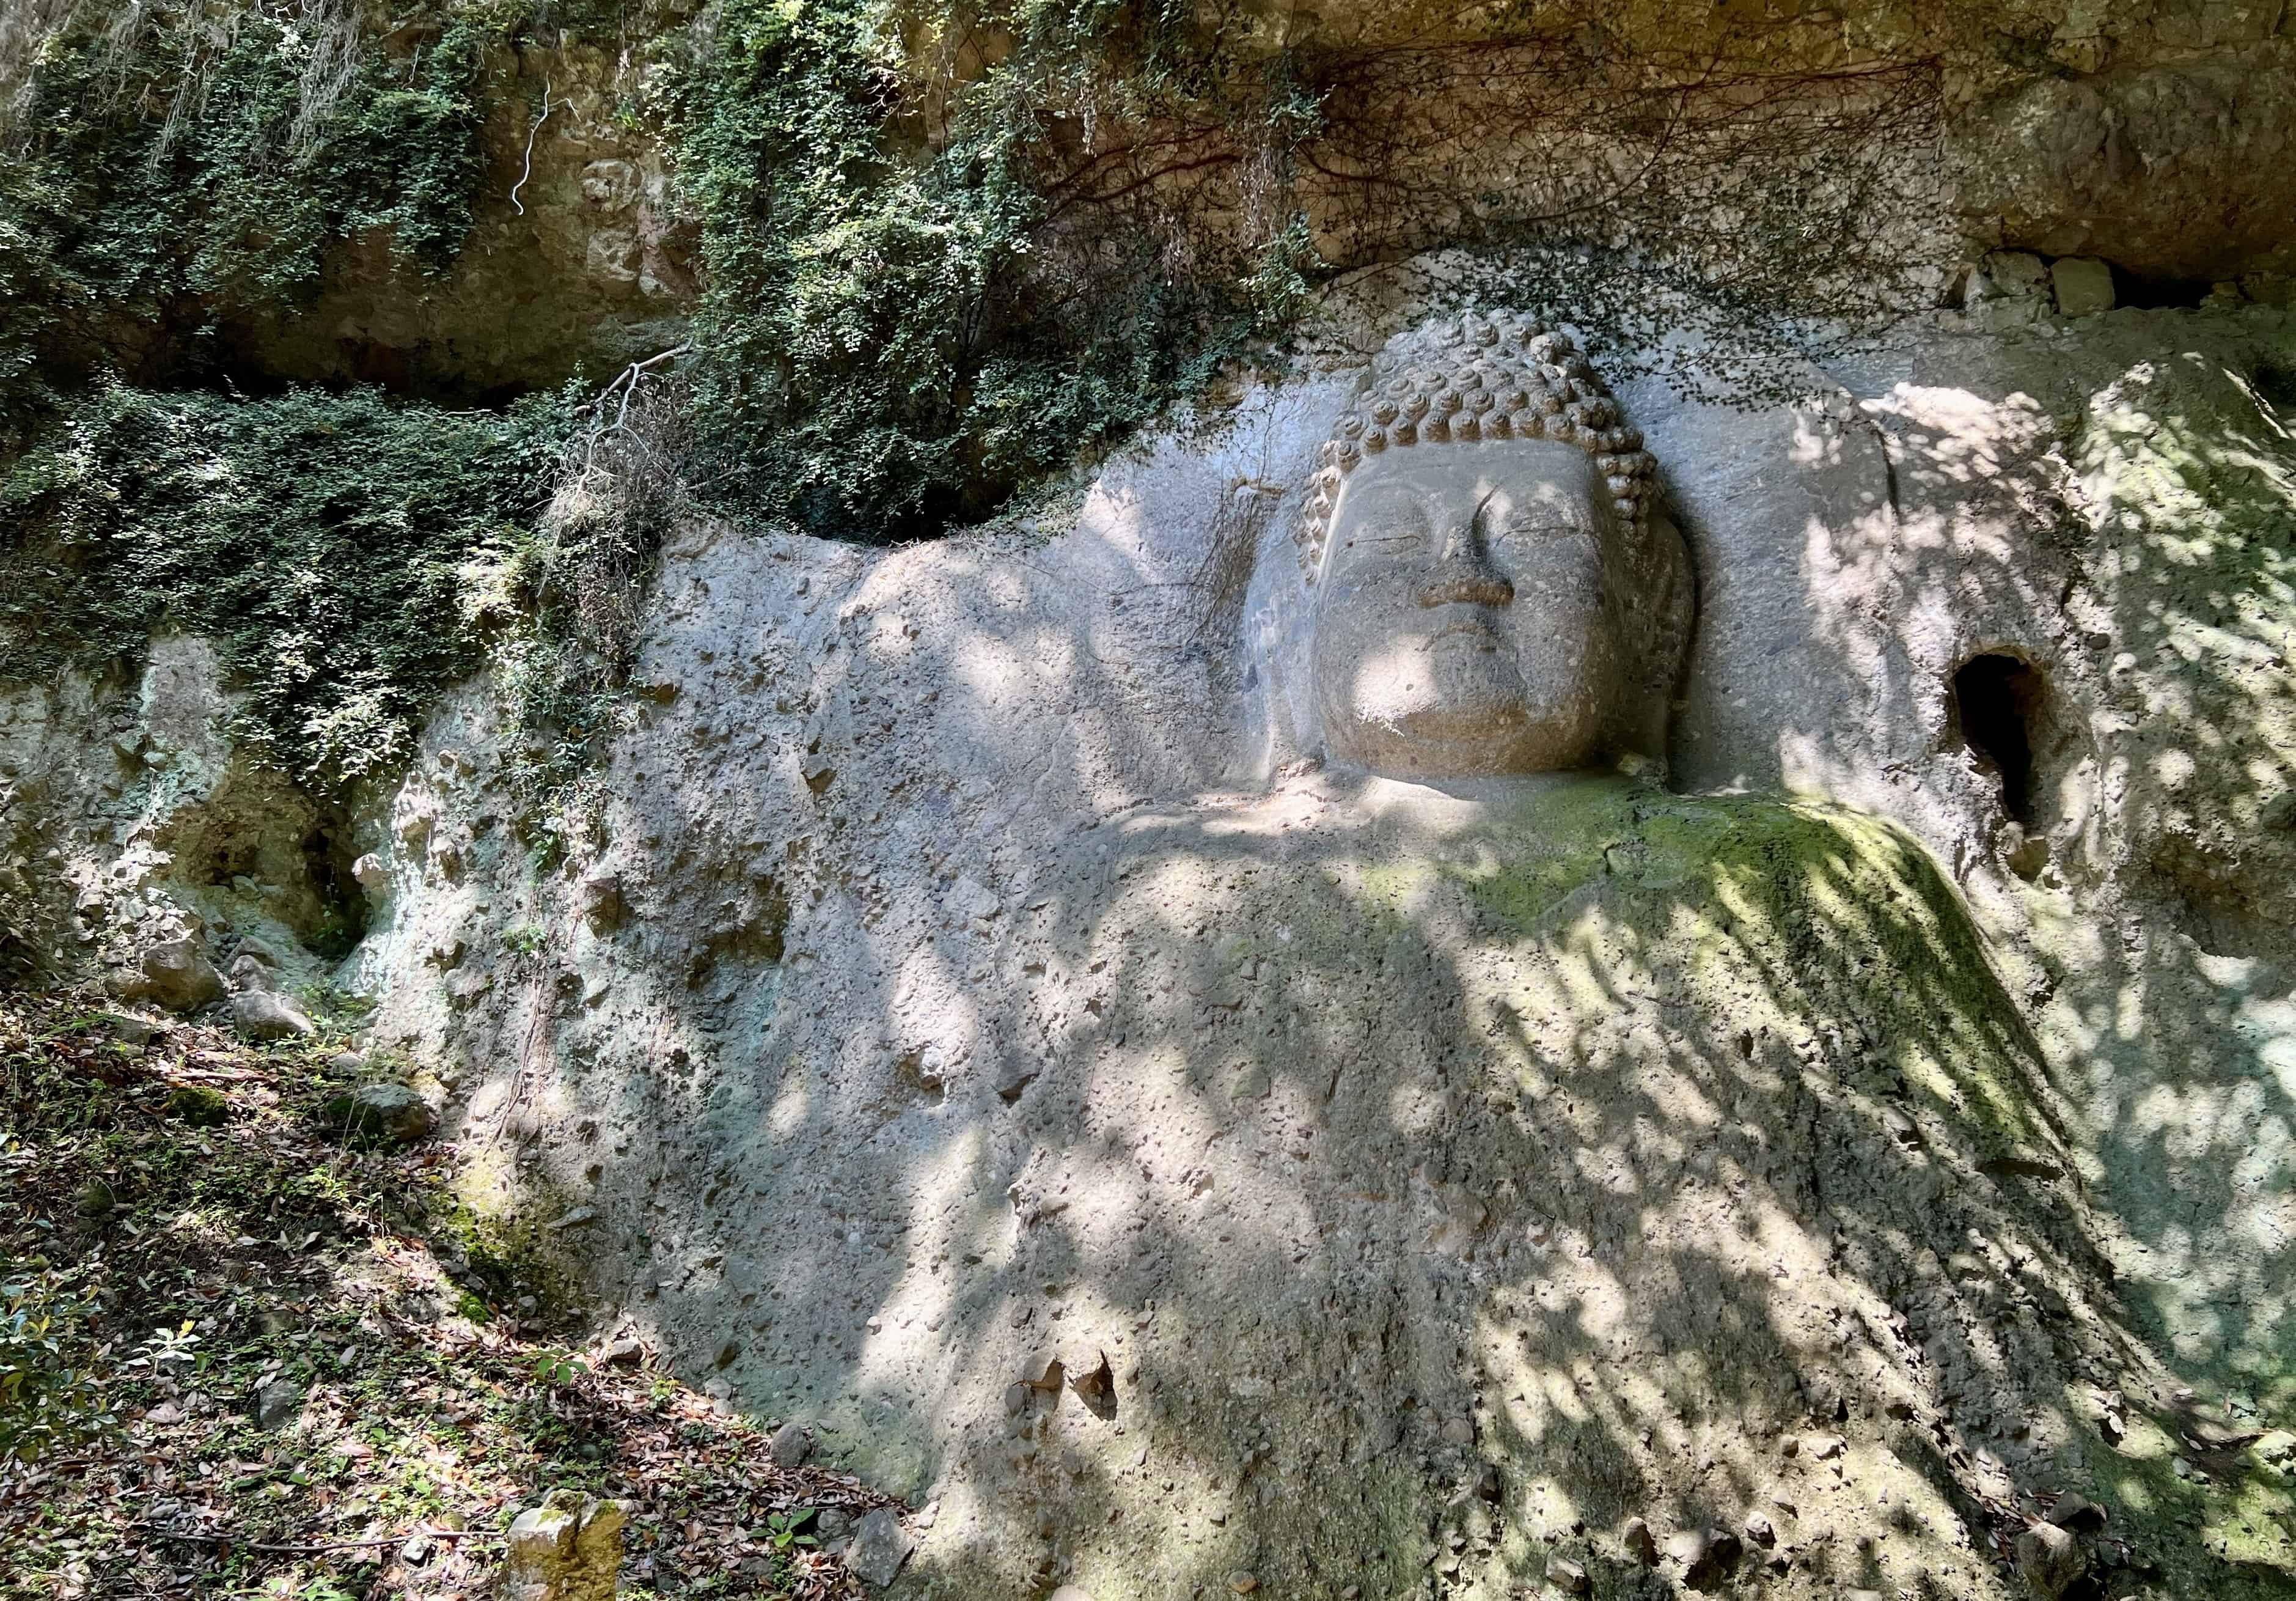 Dainichi Nyorai carved into cliff-face.